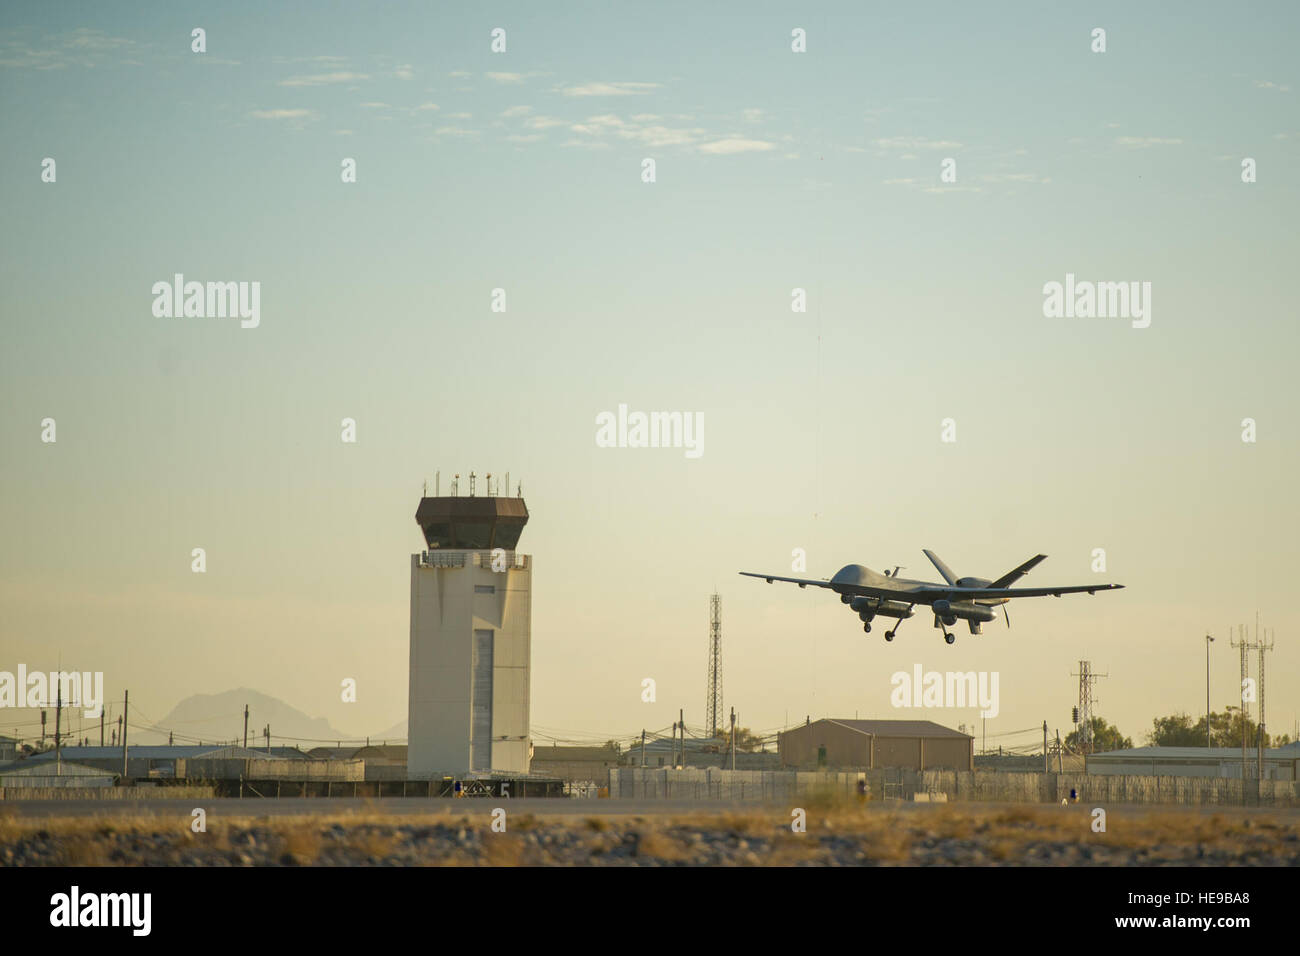 An MQ-9 Reaper equipped with Gorgon Stare from the 62nd Expeditionary Reconnaissance Squadron takes off at Kandahar Airfield, Afghanistan, Dec. 5, 2015. The capability combines real-time situational awareness for strike coordination and reconnaissance, or cross-cueing other sensors, with persistent video recording for forensic analysis and pattern-of-life study.  Tech. Sgt. Robert Cloys Stock Photo